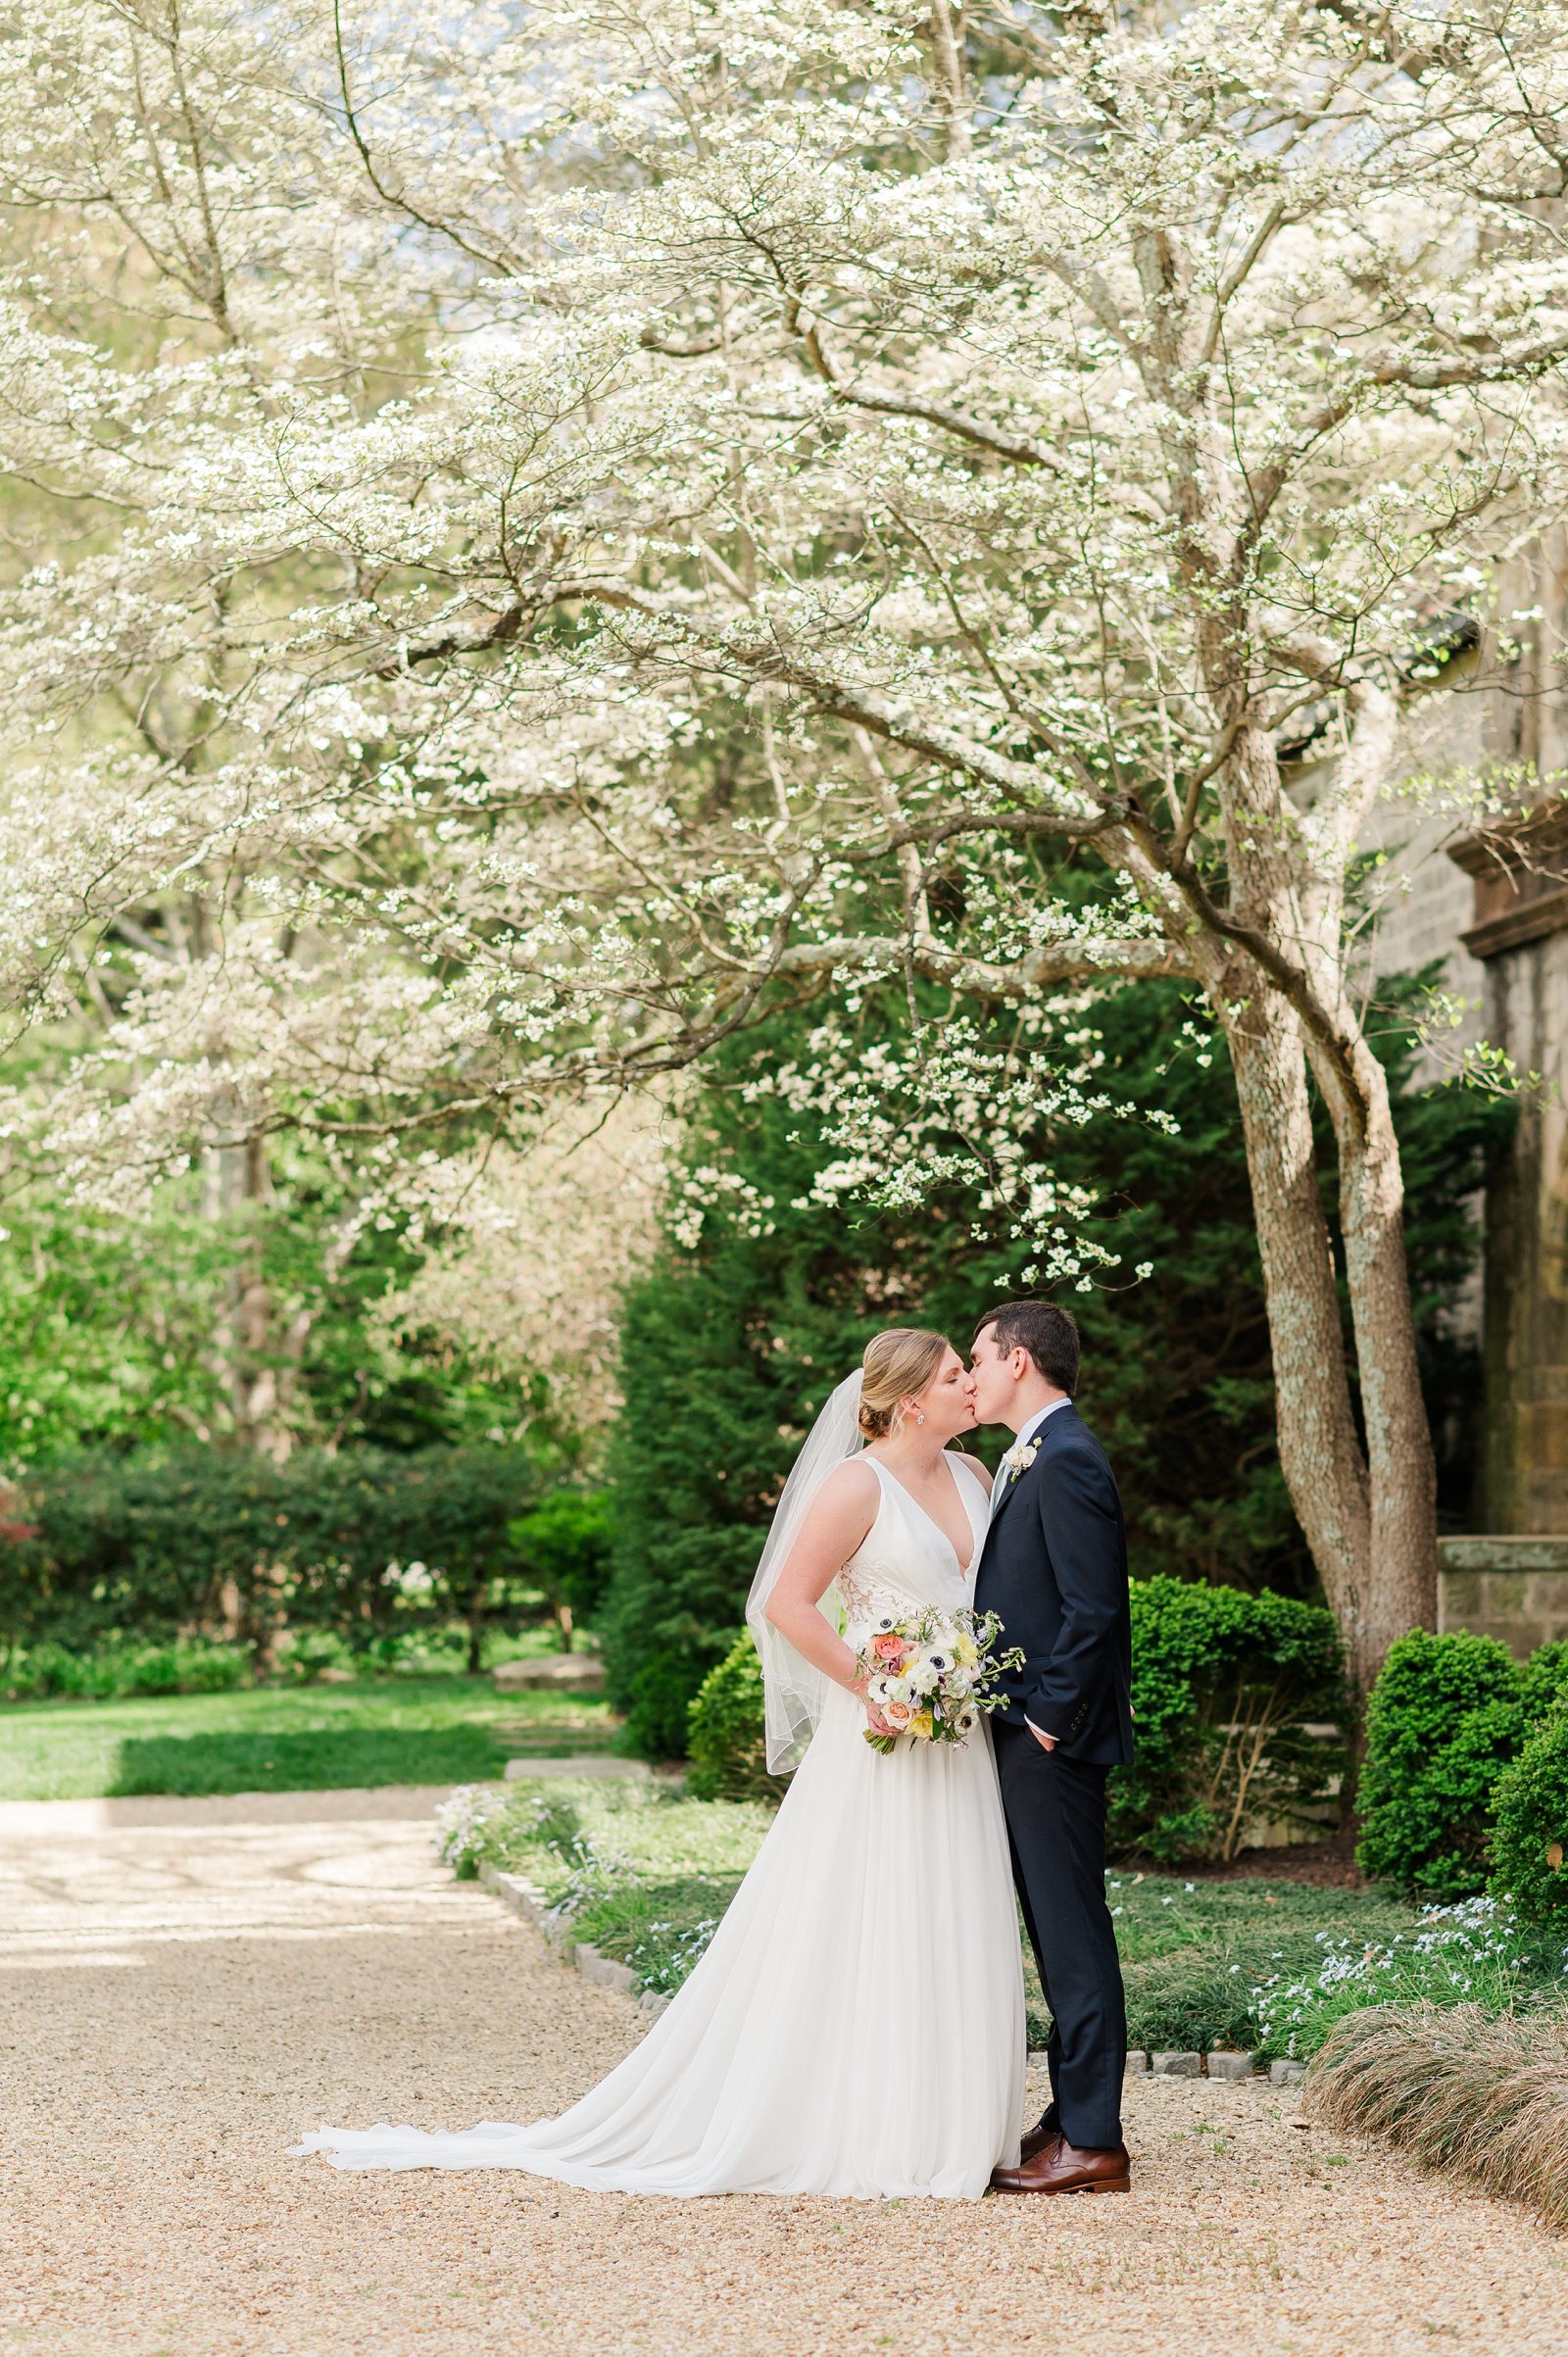 Emotional First Look at an Intimate Virginia House Wedding by Richmond Wedding Photographer Kailey Brianne Photography.